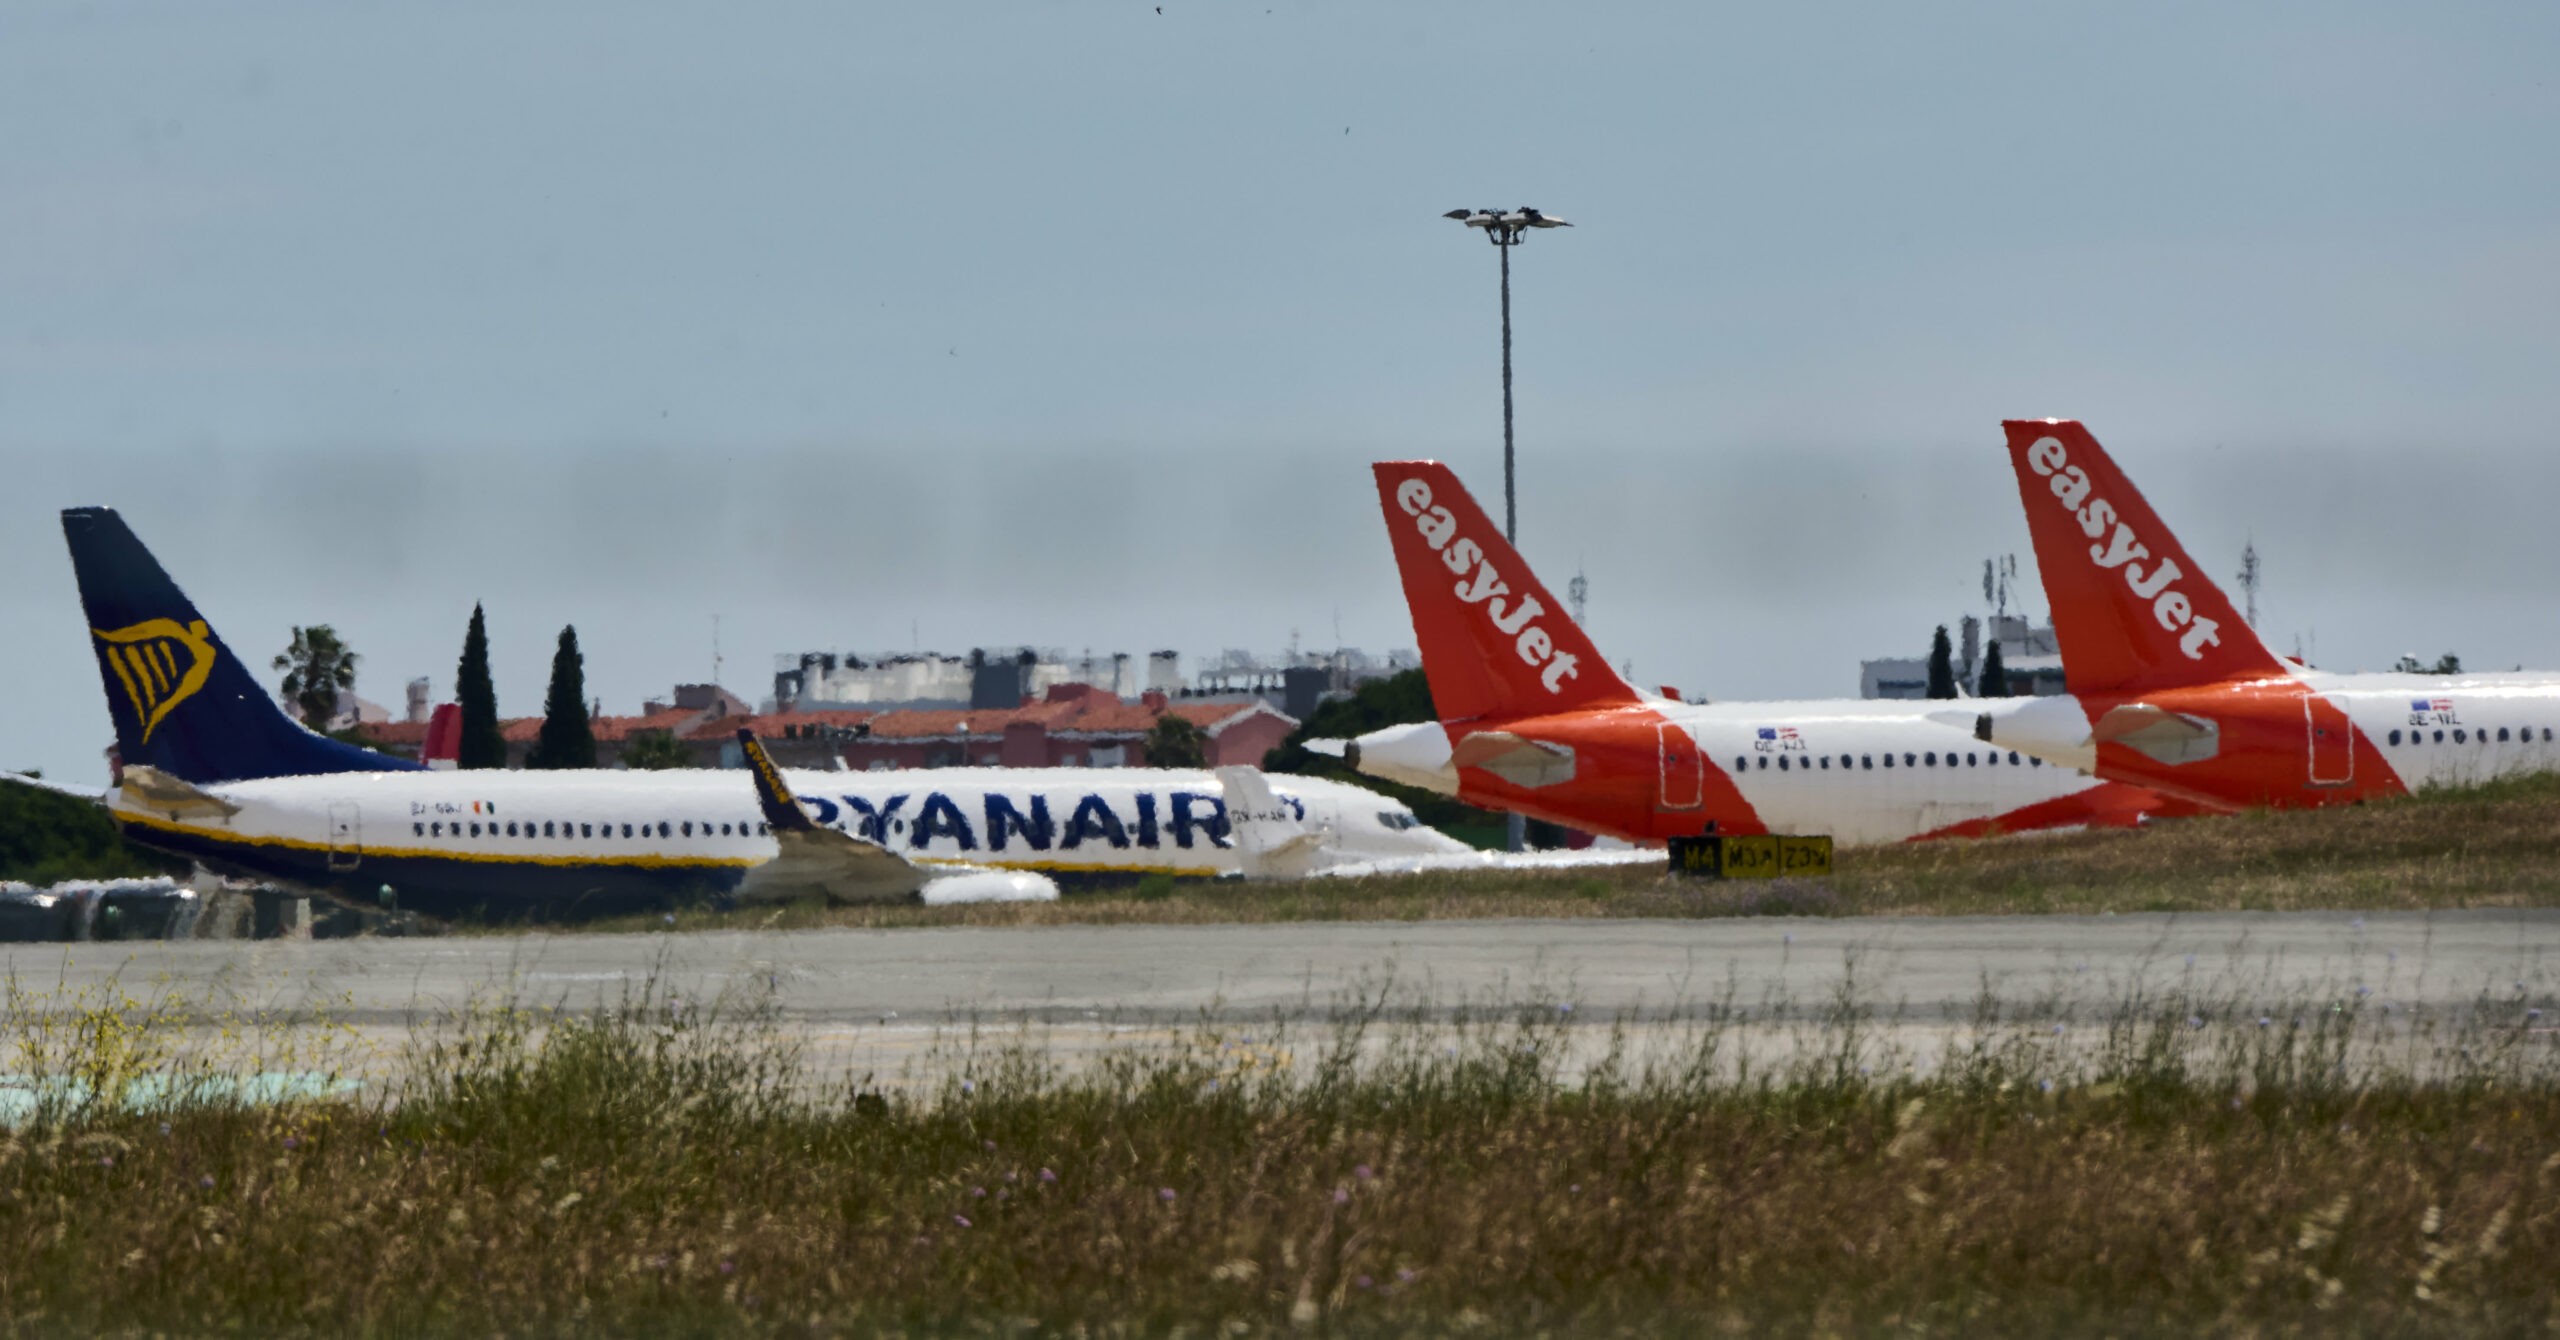 Europe’s low-cost airlines could have the edge in a post-Covid world